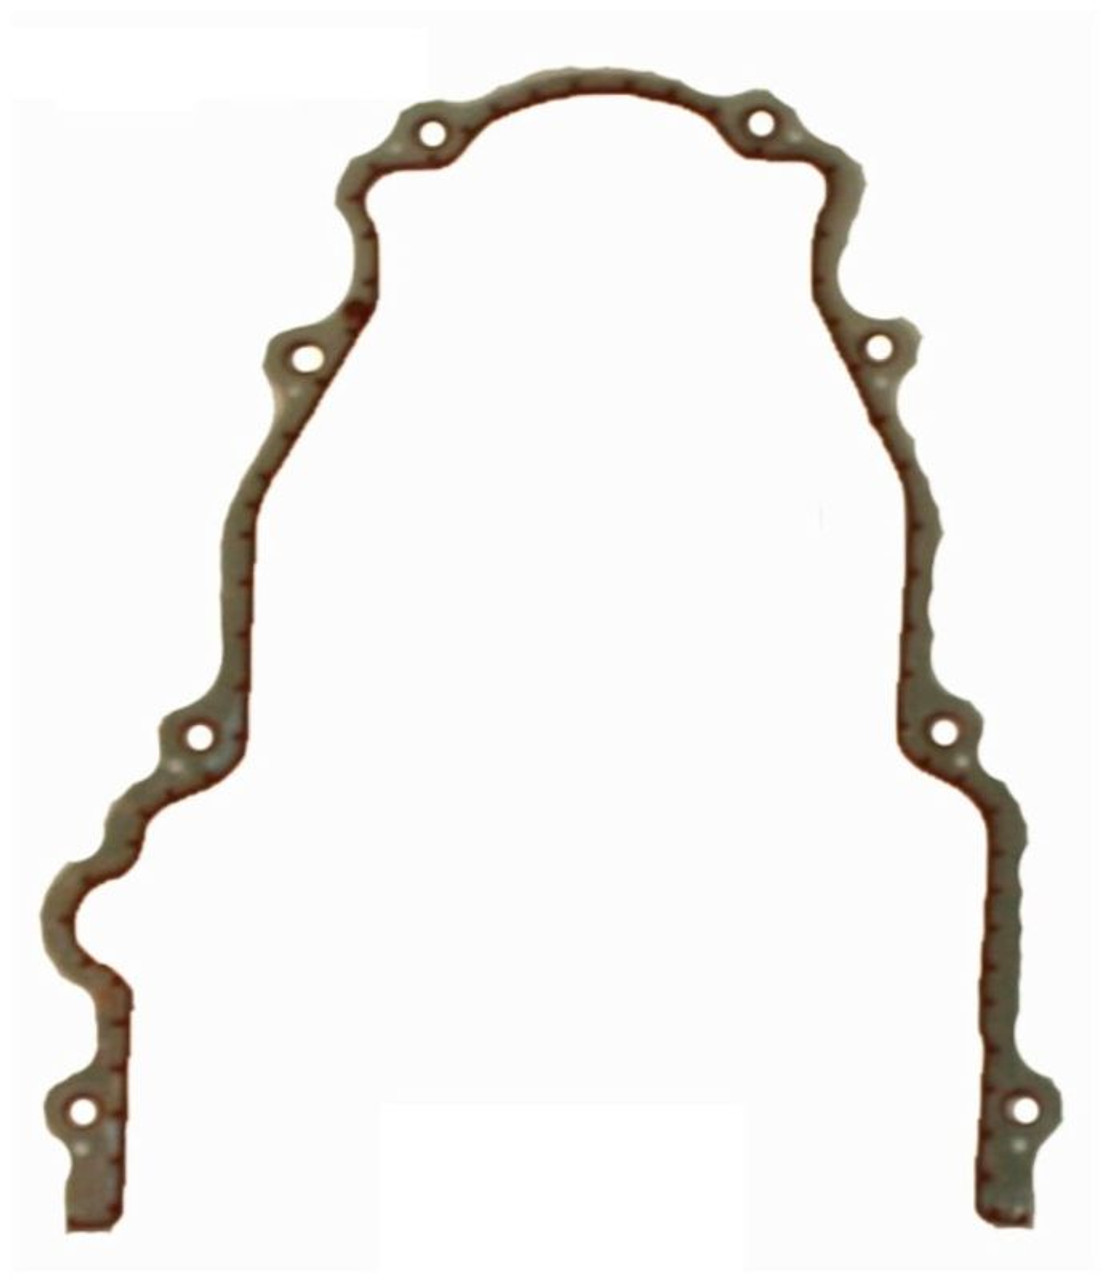 2006 Chevrolet Tahoe 4.8L Engine Timing Cover Gasket TCG293-A -344